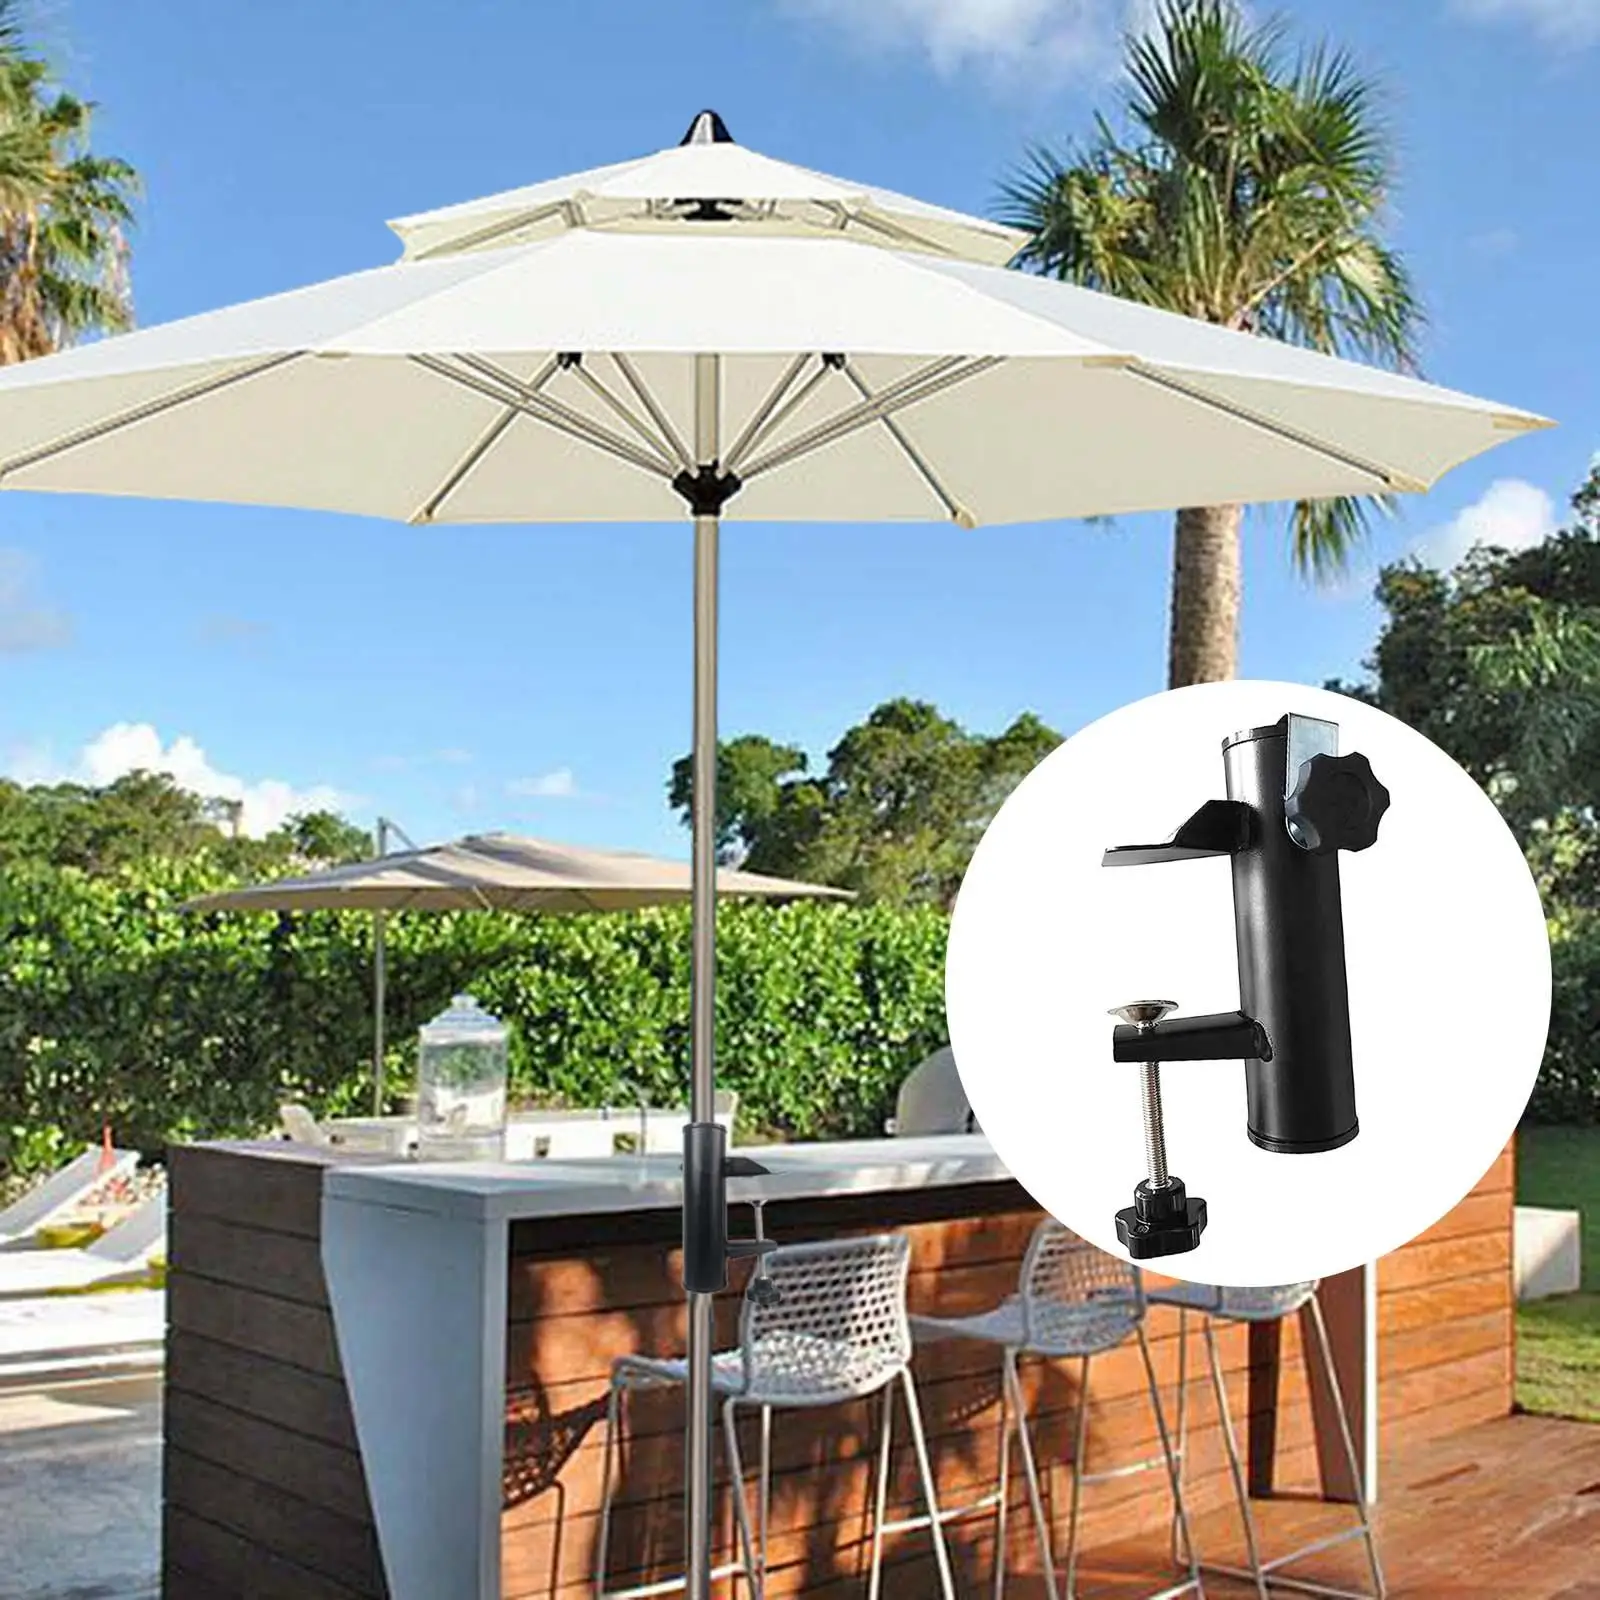 Umbrella Clamp Stand Holder Fixed Clip Umbrella Clip Bench Outdoor Umbrella Holder for Fishing Rod Lawn Fence Deck Yard